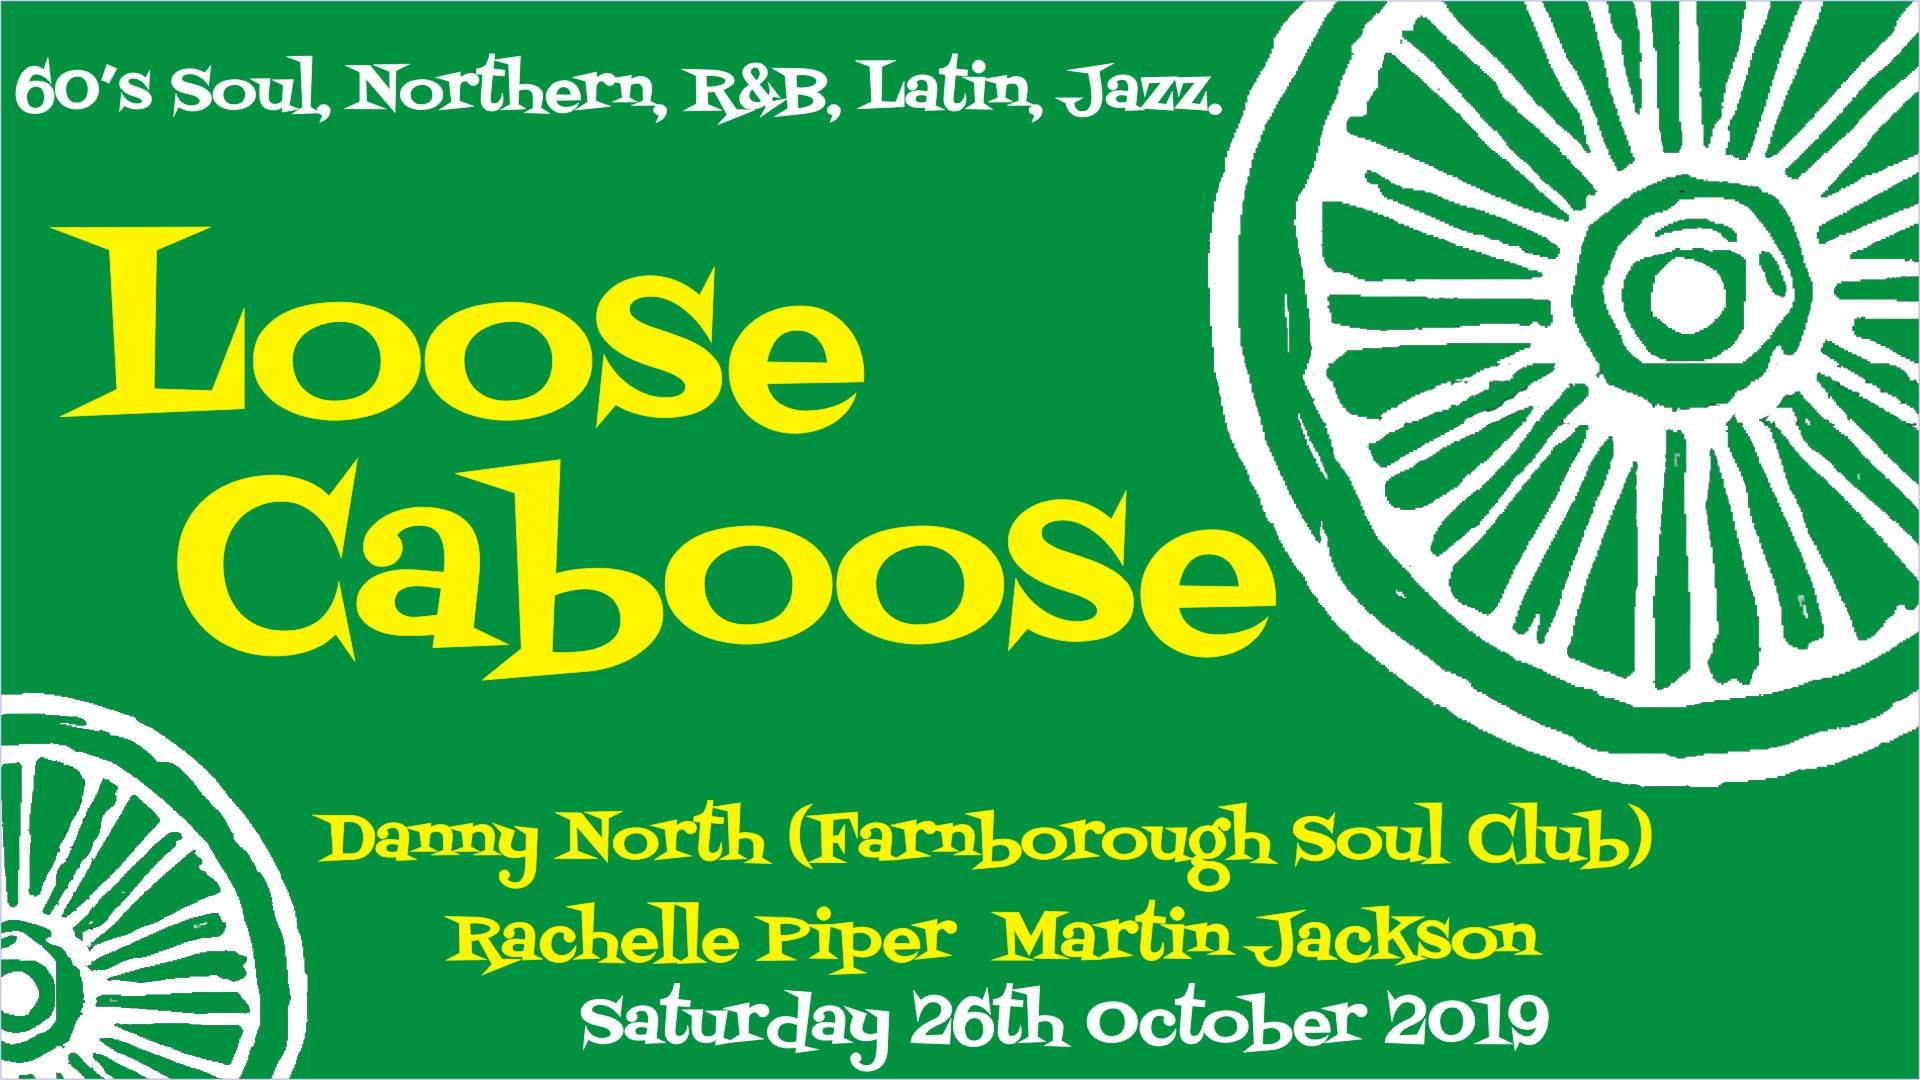 Loose Caboose - 26/10/19 - DJs Rachelle Piper, Martin Jackson & Danny North. 60s Soul, Northern Soul, 60s R&B, Latin Soul & Jazz. Lewes Con Club, 139 High Street, Lewes, BN7 1XS